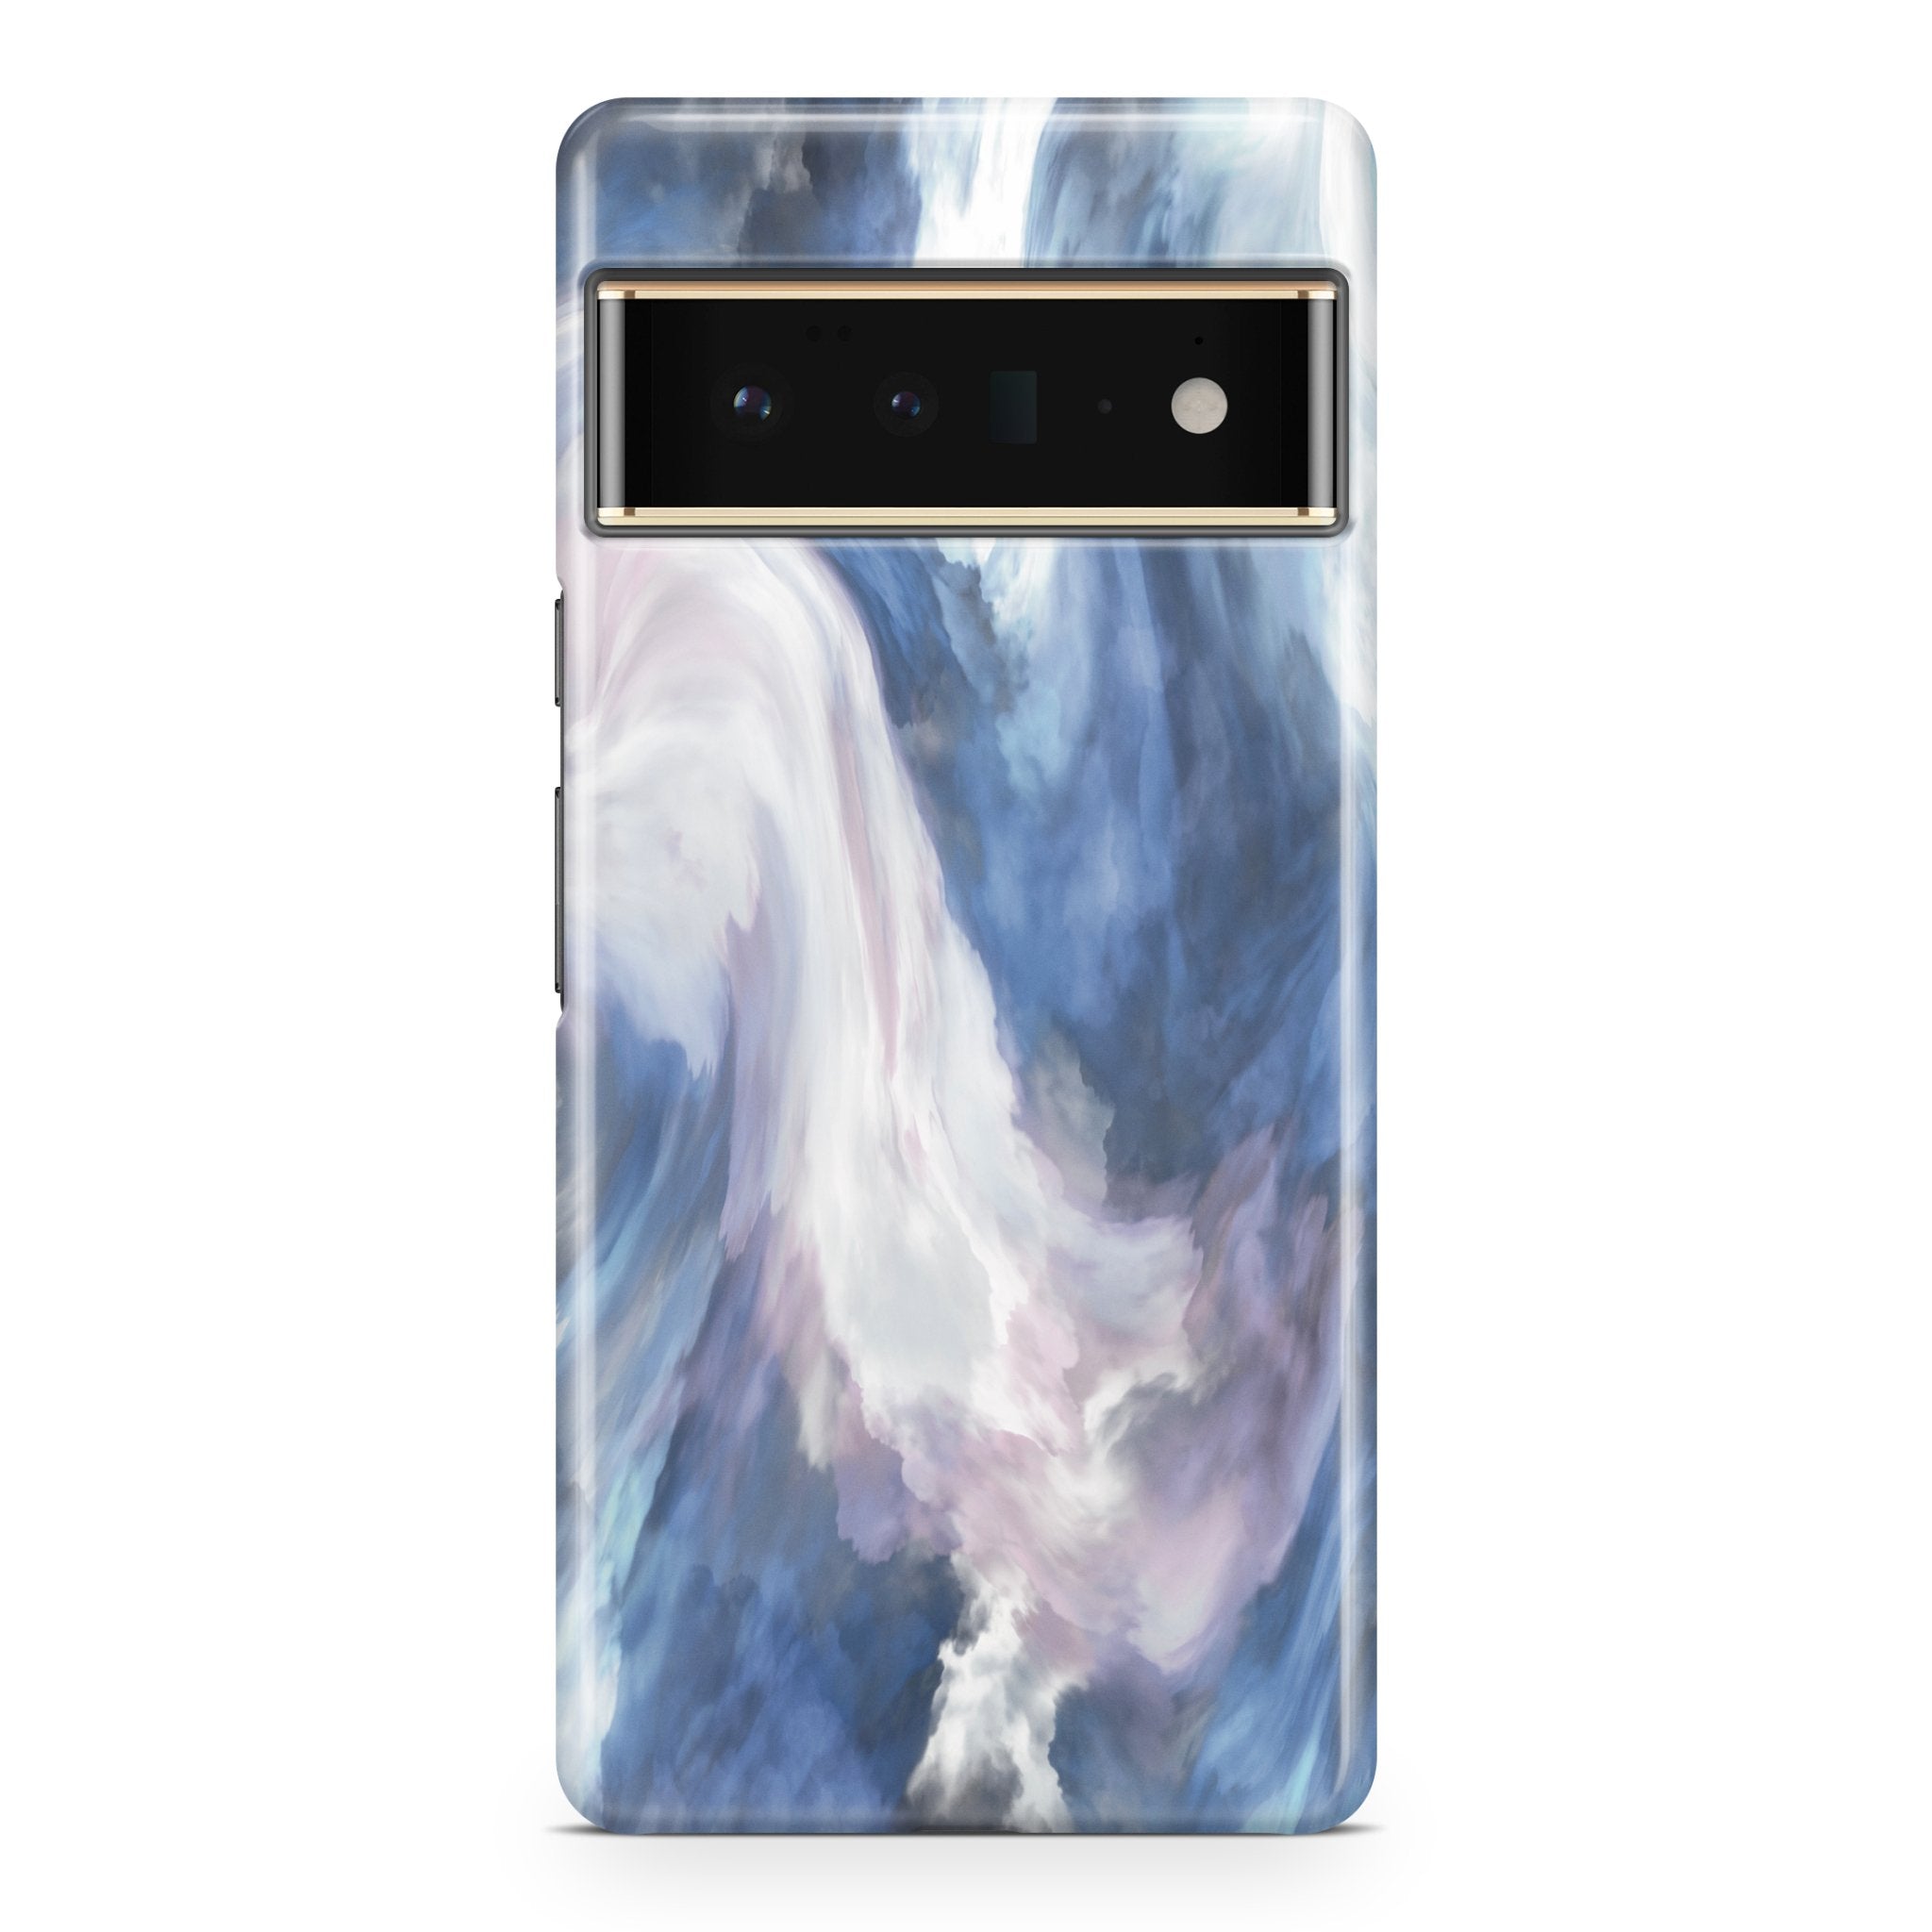 Winter Abstract II - Google phone case designs by CaseSwagger